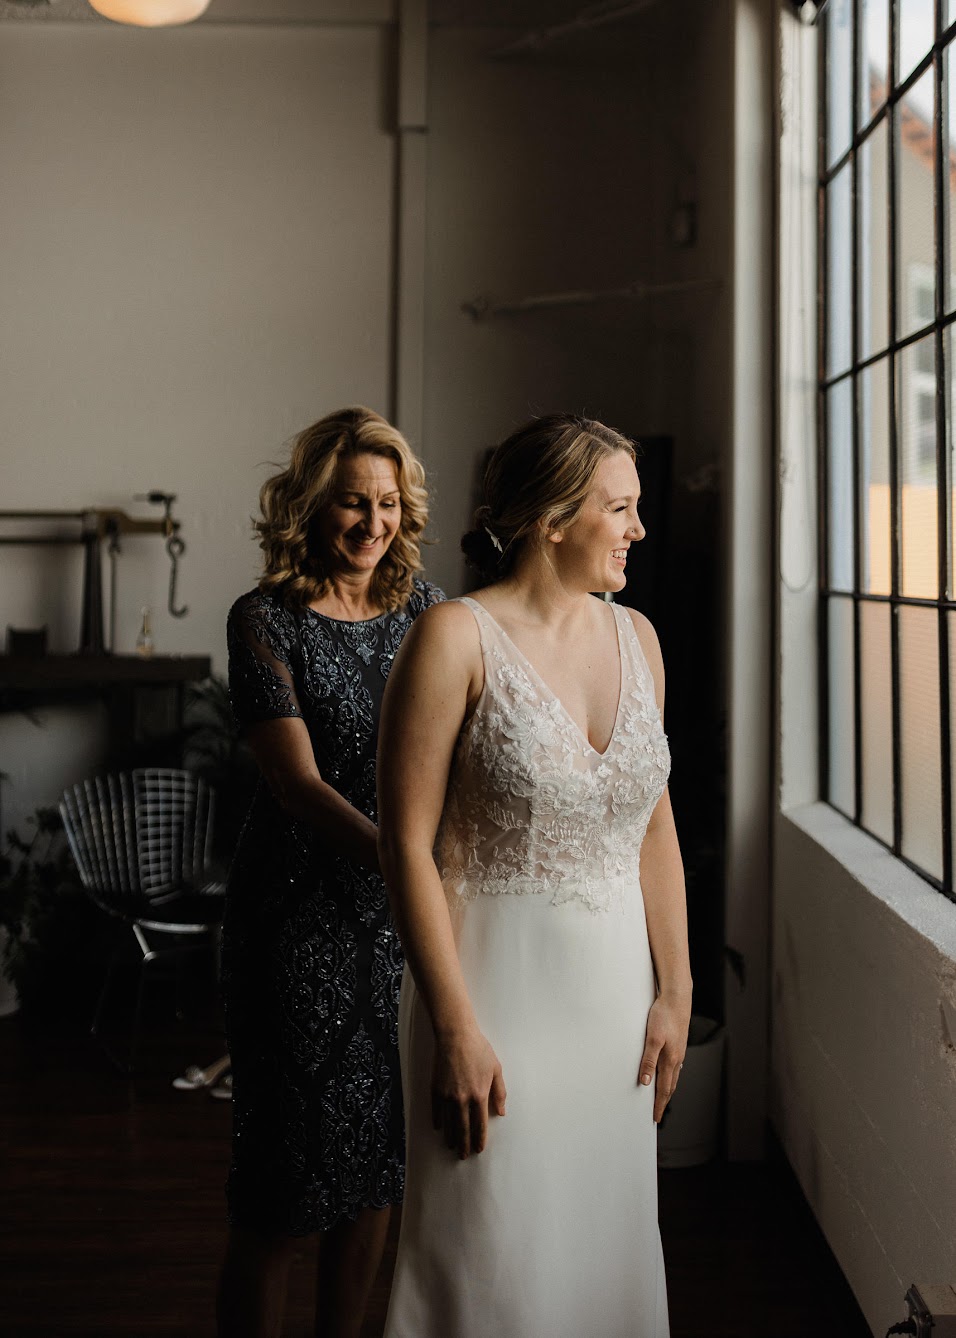 bride looking out the window while mom is helping her with